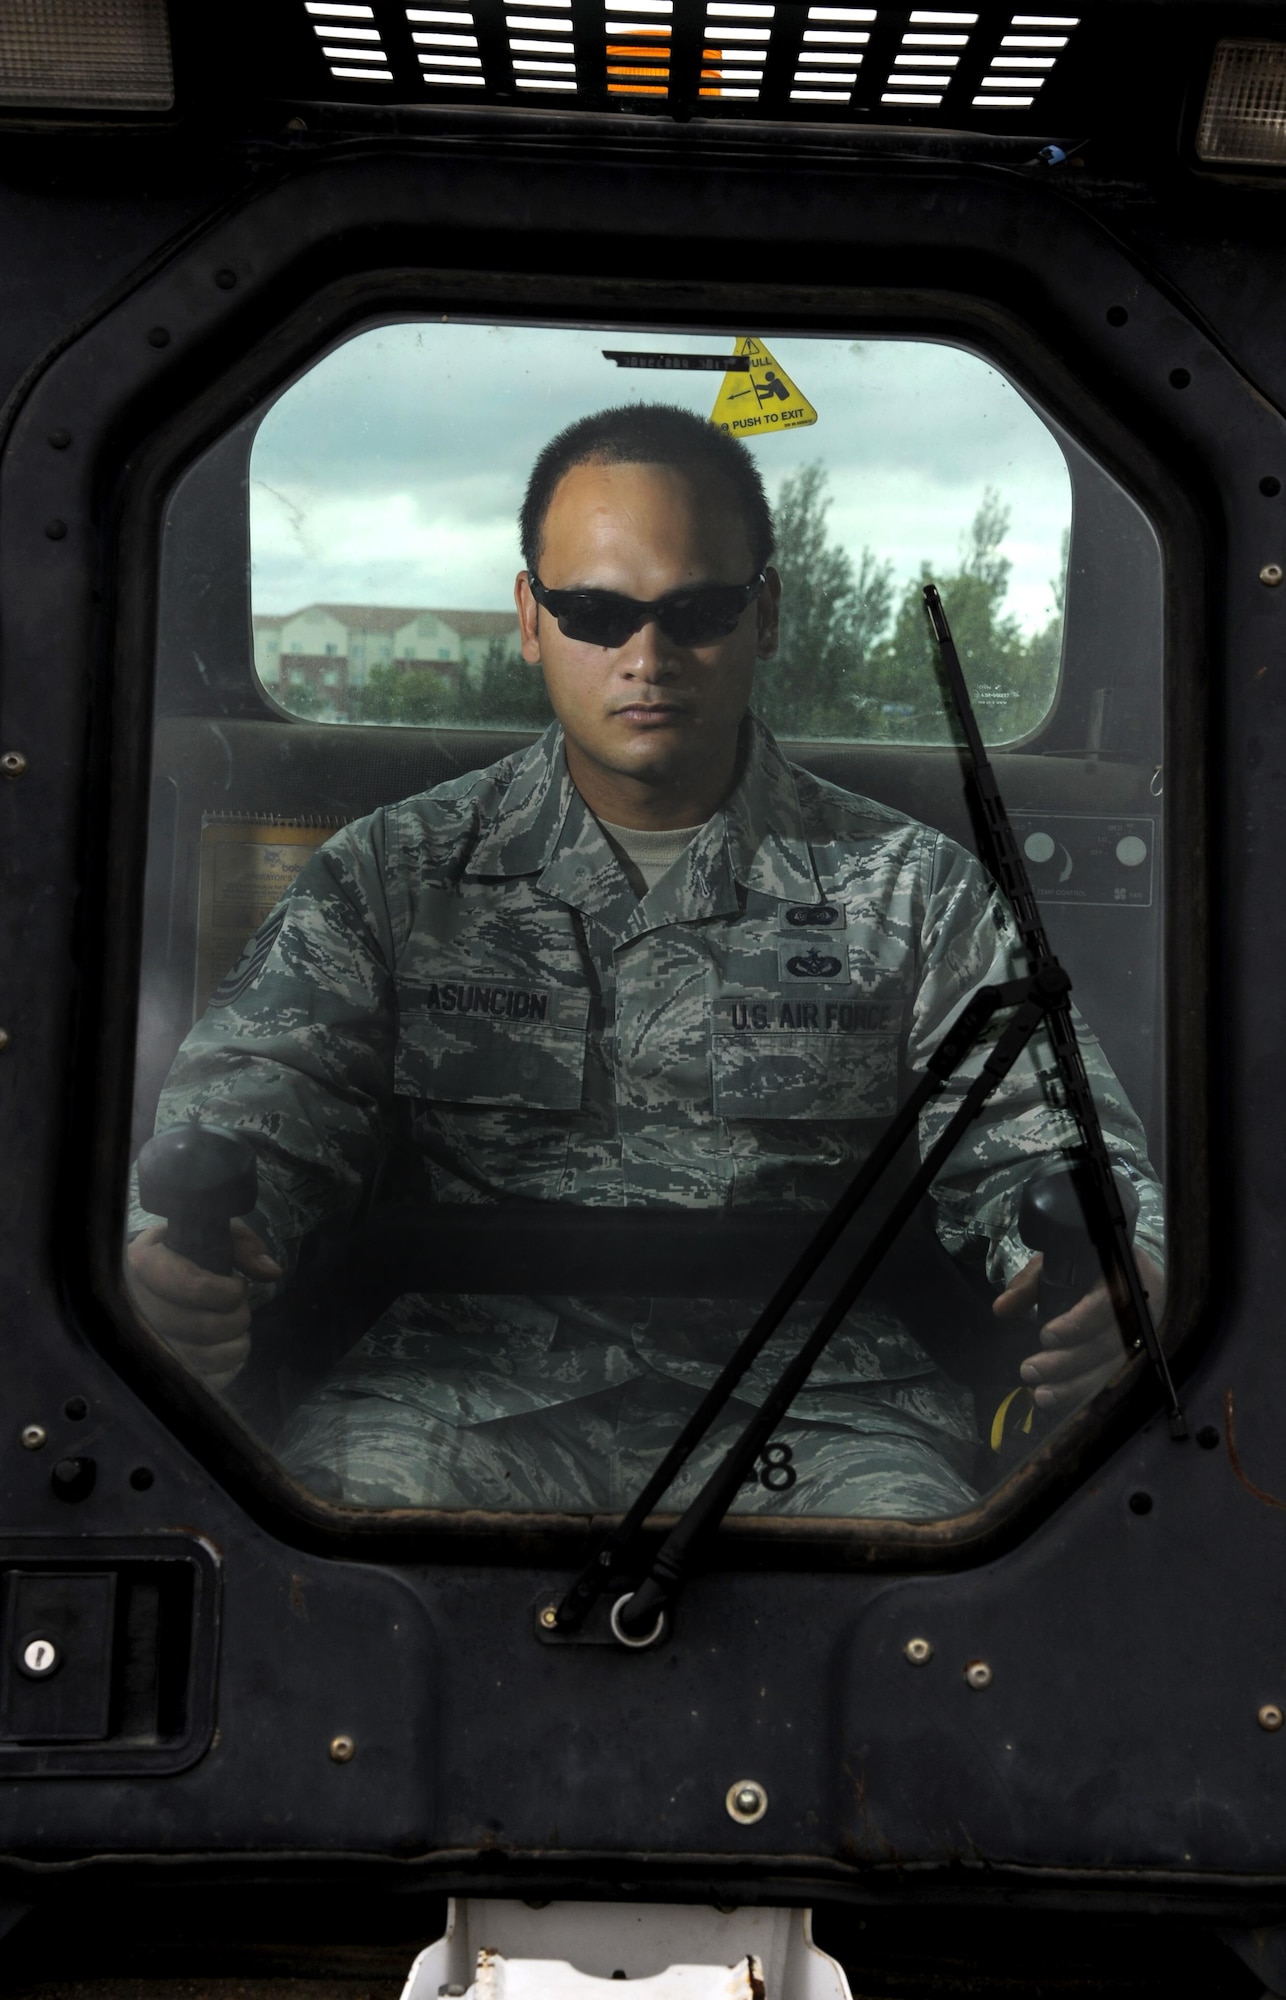 Tech. Sgt. Michael Asuncion Jr., formerly assigned to the 45th Civil Engineer Squadron at Patrick Air Force Base, Florida, sits in a Bobcat skid steer at Minot Air Force Base, N.D., July 12, 2016. Asuncion was named one of the 12 Outstanding Airmen of the Year for 2015 when he was a “dirt boy” at Patrick AFB, Fla. (U.S. Air Force photo/Airman 1st Class Christian Sullivan) 